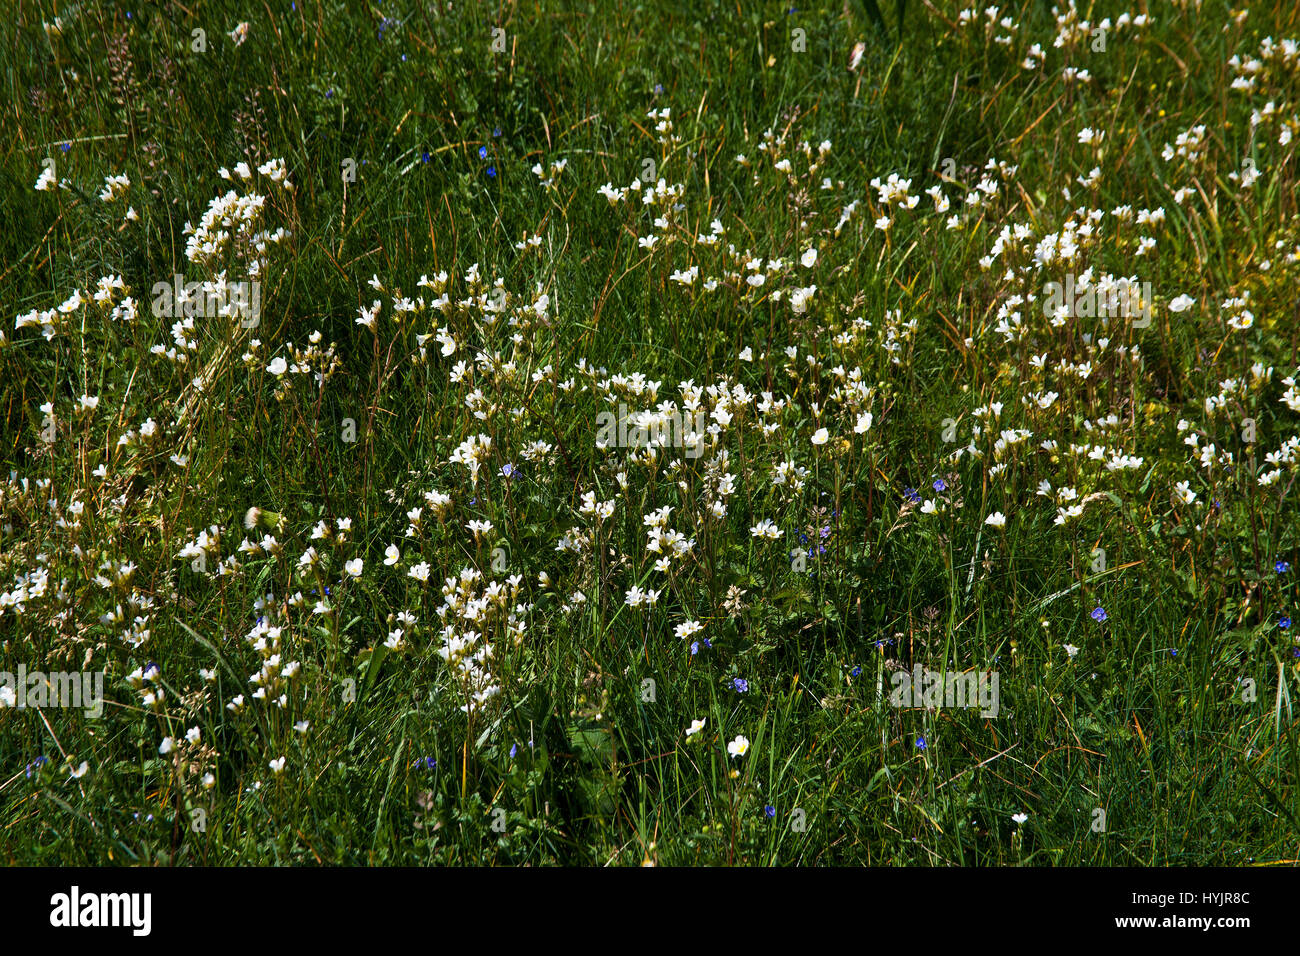 Meadow saxifrage Saxifraga granulata in alpine meadow Hauts Plateaux Reserve Vercors Regional Natural Park Vercors France Stock Photo